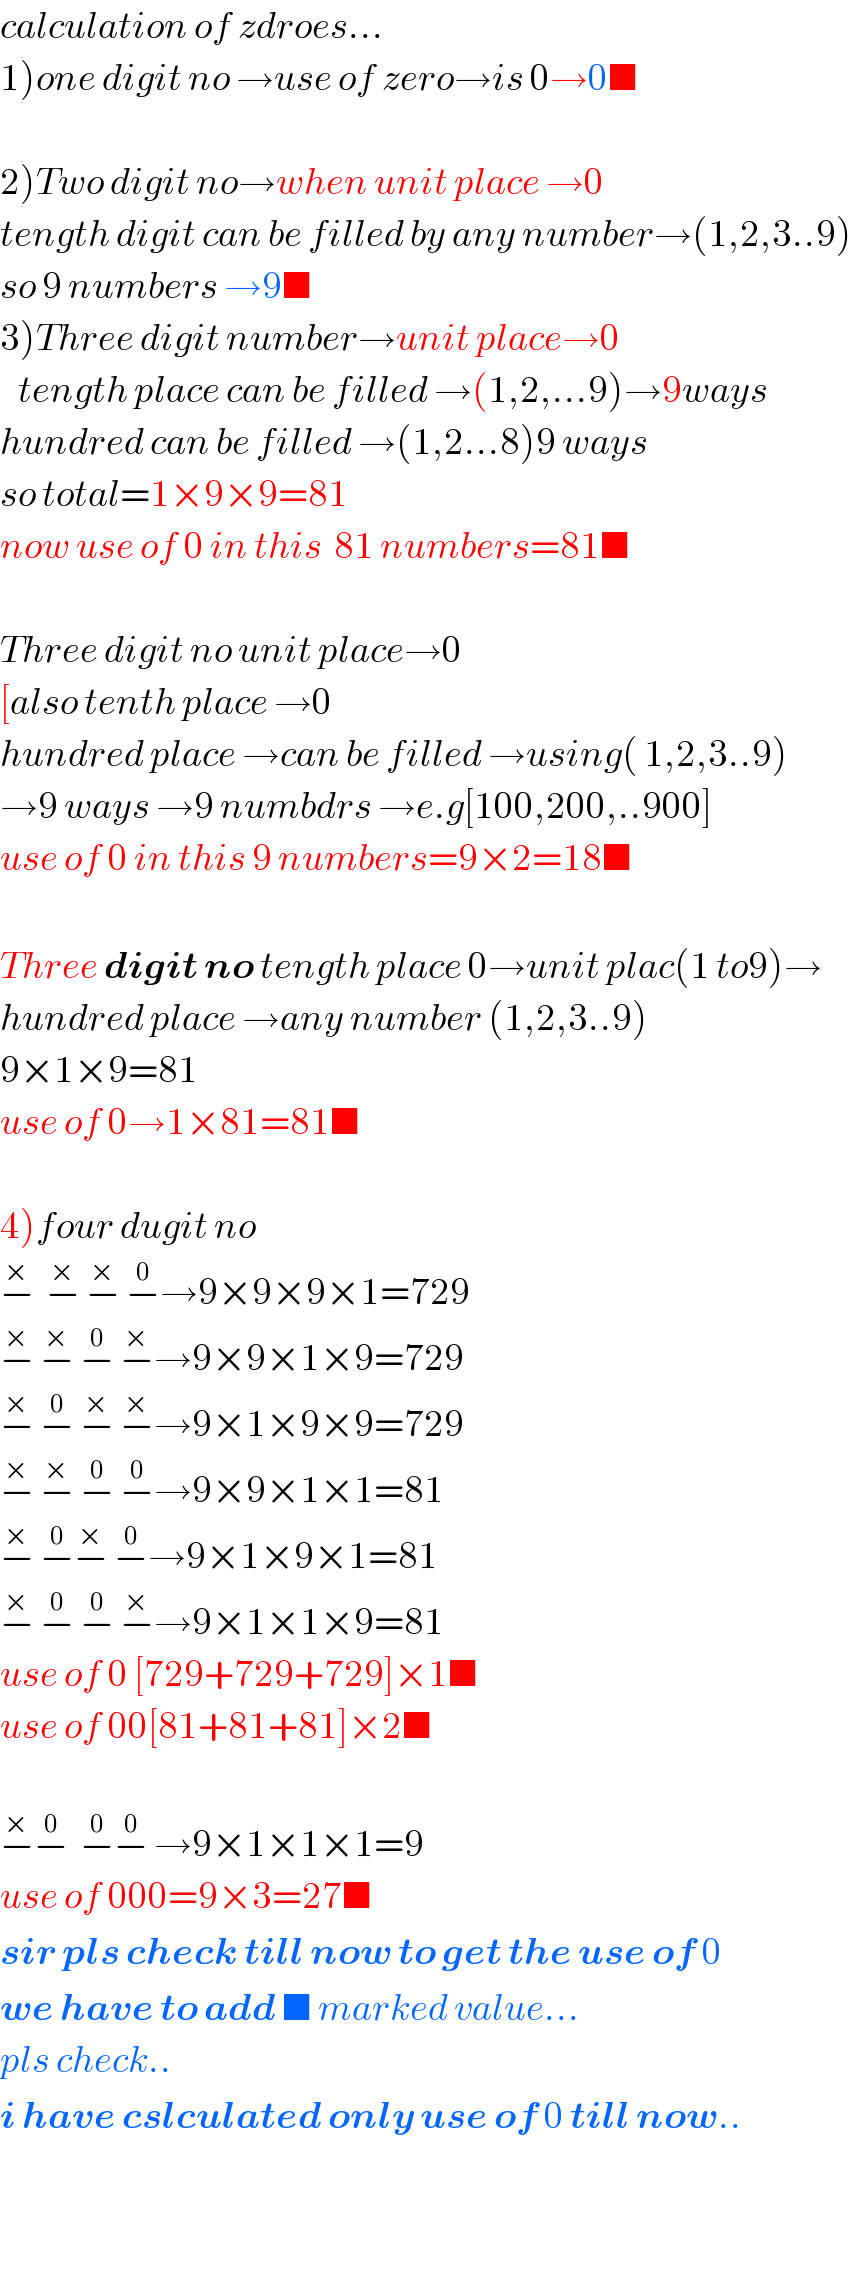 calculation of zdroes...  1)one digit no →use of zero→is 0→0■    2)Two digit no→when unit place →0  tength digit can be filled by any number→(1,2,3..9)  so 9 numbers →9■  3)Three digit number→unit place→0     tength place can be filled →(1,2,...9)→9ways  hundred can be filled →(1,2...8)9 ways  so total=1×9×9=81  now use of 0 in this  81 numbers=81■    Three digit no unit place→0  [also tenth place →0  hundred place →can be filled →using( 1,2,3..9)  →9 ways →9 numbdrs →e.g[100,200,..900]  use of 0 in this 9 numbers=9×2=18■    Three digit no tength place 0→unit plac(1 to9)→  hundred place →any number (1,2,3..9)  9×1×9=81  use of 0→1×81=81■    4)four dugit no  −^×   −^×  −^×  −^0 →9×9×9×1=729  −^×  −^×  −^0  −^× →9×9×1×9=729  −^×  −^0  −^×  −^× →9×1×9×9=729  −^×  −^×  −^0  −^0 →9×9×1×1=81  −^×  −^0 −^×  −^0 →9×1×9×1=81  −^×  −^0  −^0  −^× →9×1×1×9=81  use of 0 [729+729+729]×1■  use of 00[81+81+81]×2■    −^× −^0   −^0 −^0  →9×1×1×1=9  use of 000=9×3=27■  sir pls check till now to get the use of 0  we have to add ■ marked value...  pls check..  i have cslculated only use of 0 till now..    